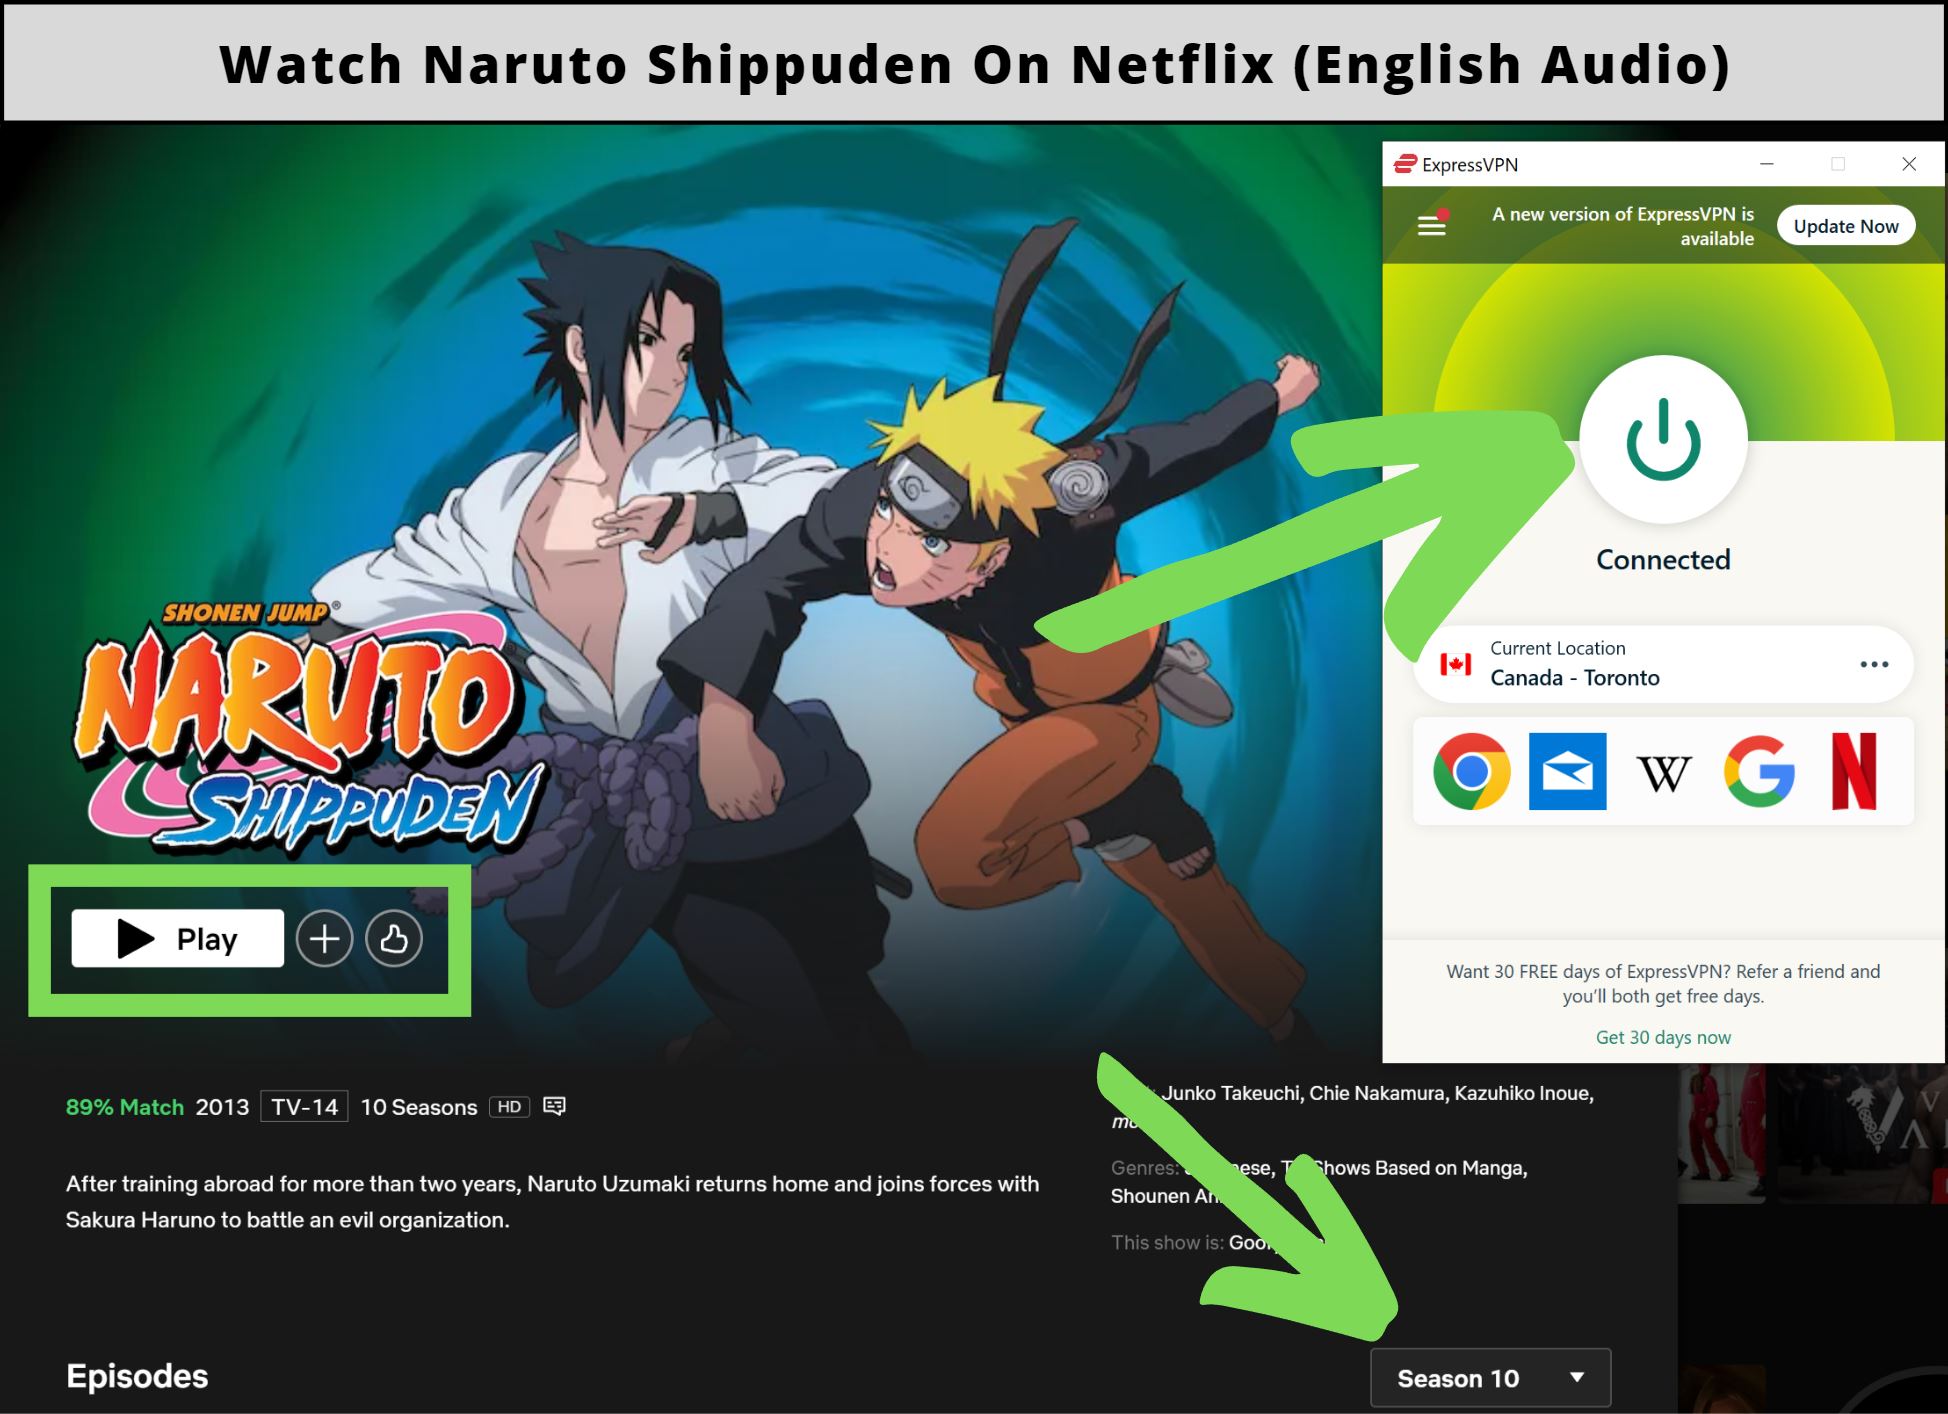 How To Watch Naruto Shippuden On Netflix (tested March 2023)